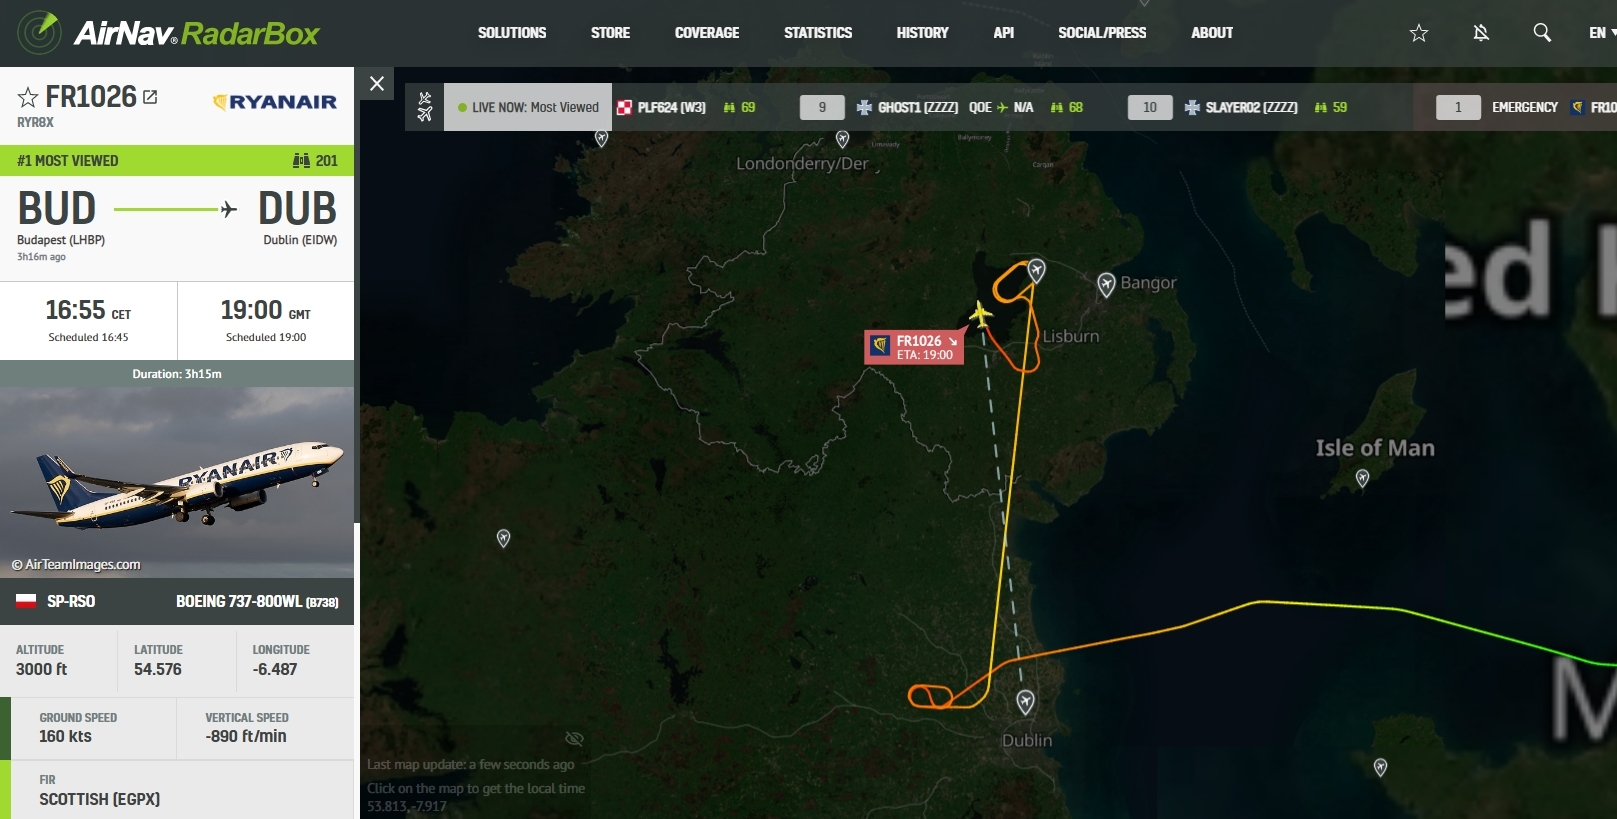 Drone Activity at Dublin Airport Causes In-Flight Emergency. Dublin Drone Closure: O'Leary Calls for Resignations